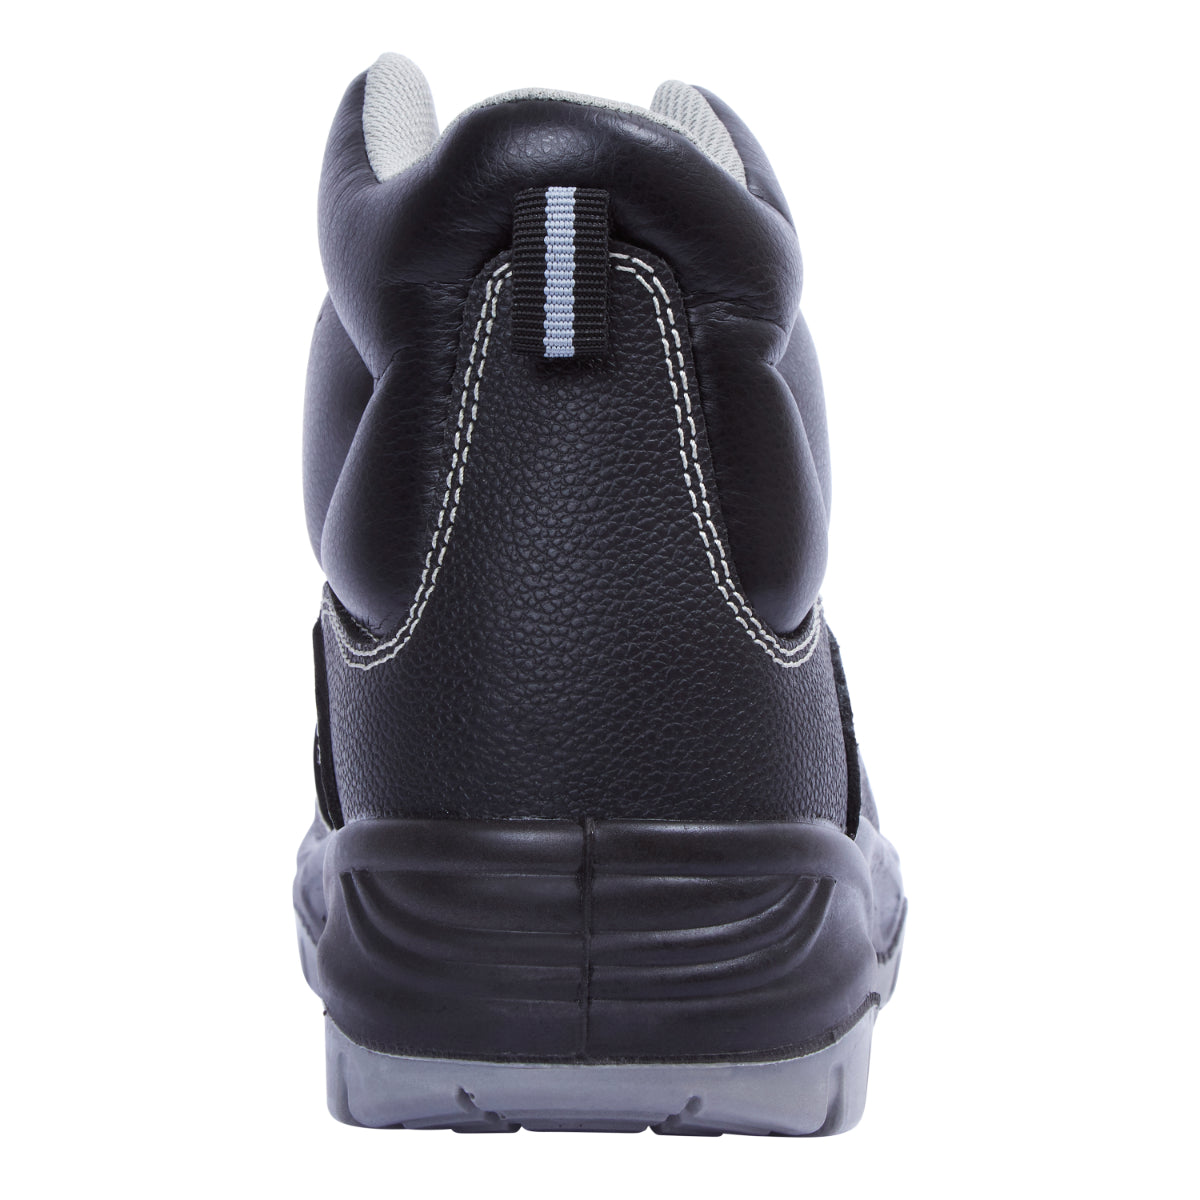 Work Site Black All Terrain Safety Boot